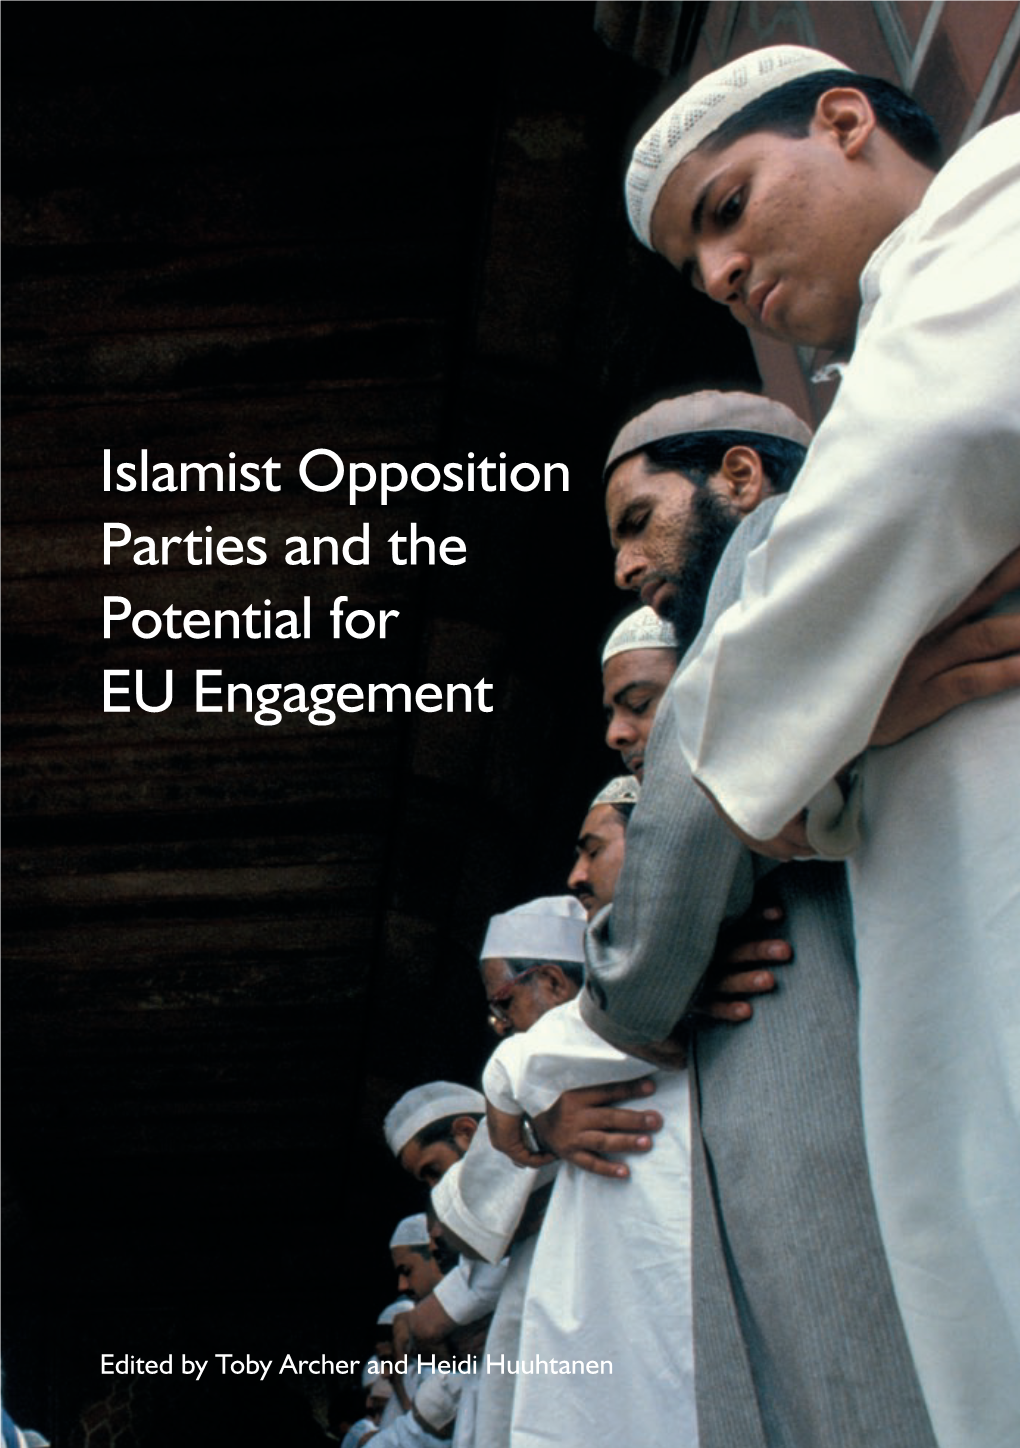 Islamist Opposition Parties and the Potential for EU Engagement